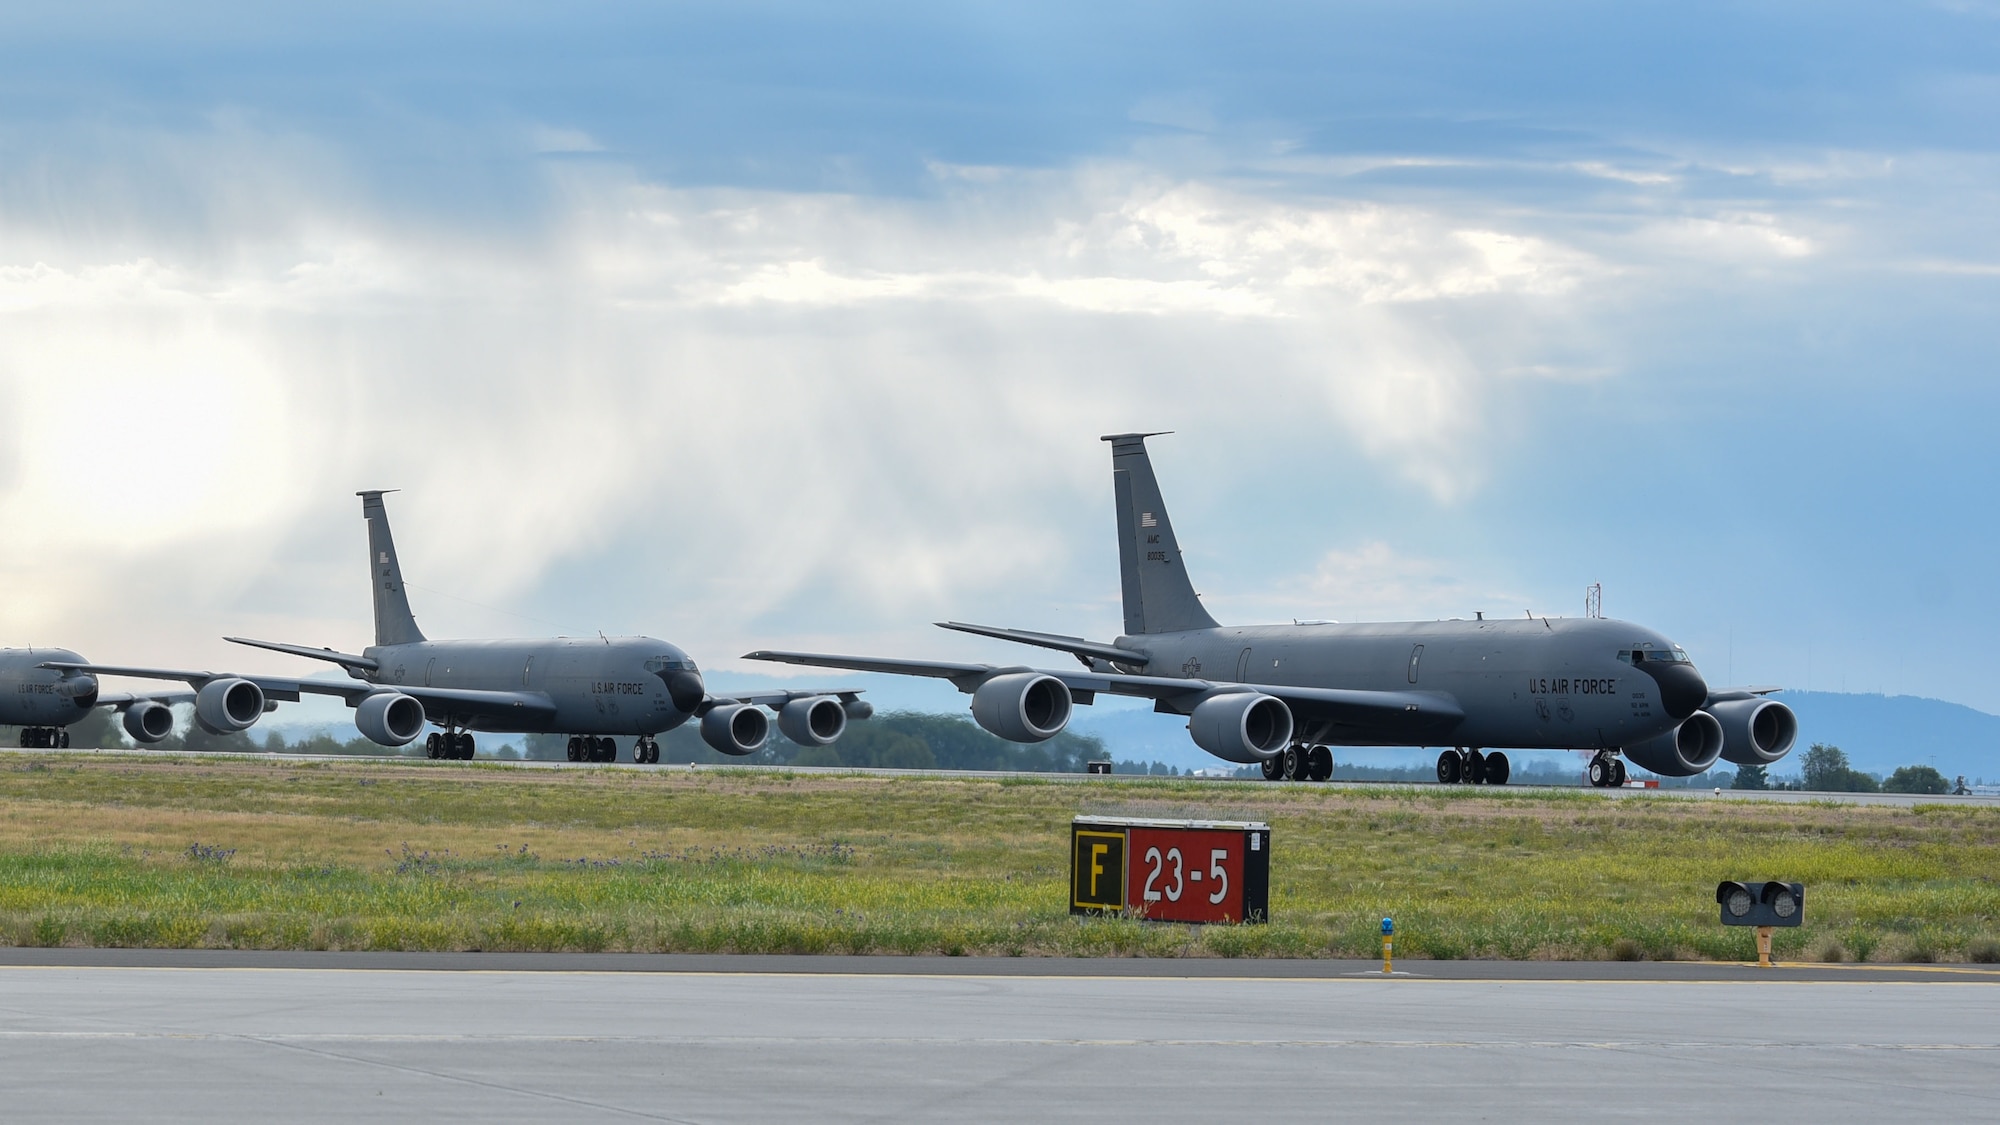 KC-135 Stratotankers assigned to the 92nd Air Refueling Wing and 141st Air Refueling Wing taxi into position before takeoff as part of Operation Centennial Contact at Fairchild Air force Base, Washington, June 27, 2023. The movement, which included stops at Yellowstone National Park, Mount Rushmore and Glacier National Park, was part of Air Mobility Command’s celebration of 100 years air refueling operations and demonstrated the 92nd Air Refueling Wing’s global reach capabilities. Since its inception in 1923, Air refueling has become a crucial component of military and civilian aviation operations around the world by extending the range and endurance of aircraft and enabling them to complete missions that would otherwise be impossible or require multiple stops. As a result, this capability is essential for strategic and tactical operations, as well as humanitarian relief efforts in support of AMC, U.S. Transportation Command and Department of Defense priorities. (U.S. Air Force photo by Airman 1st Class Lillian Patterson)